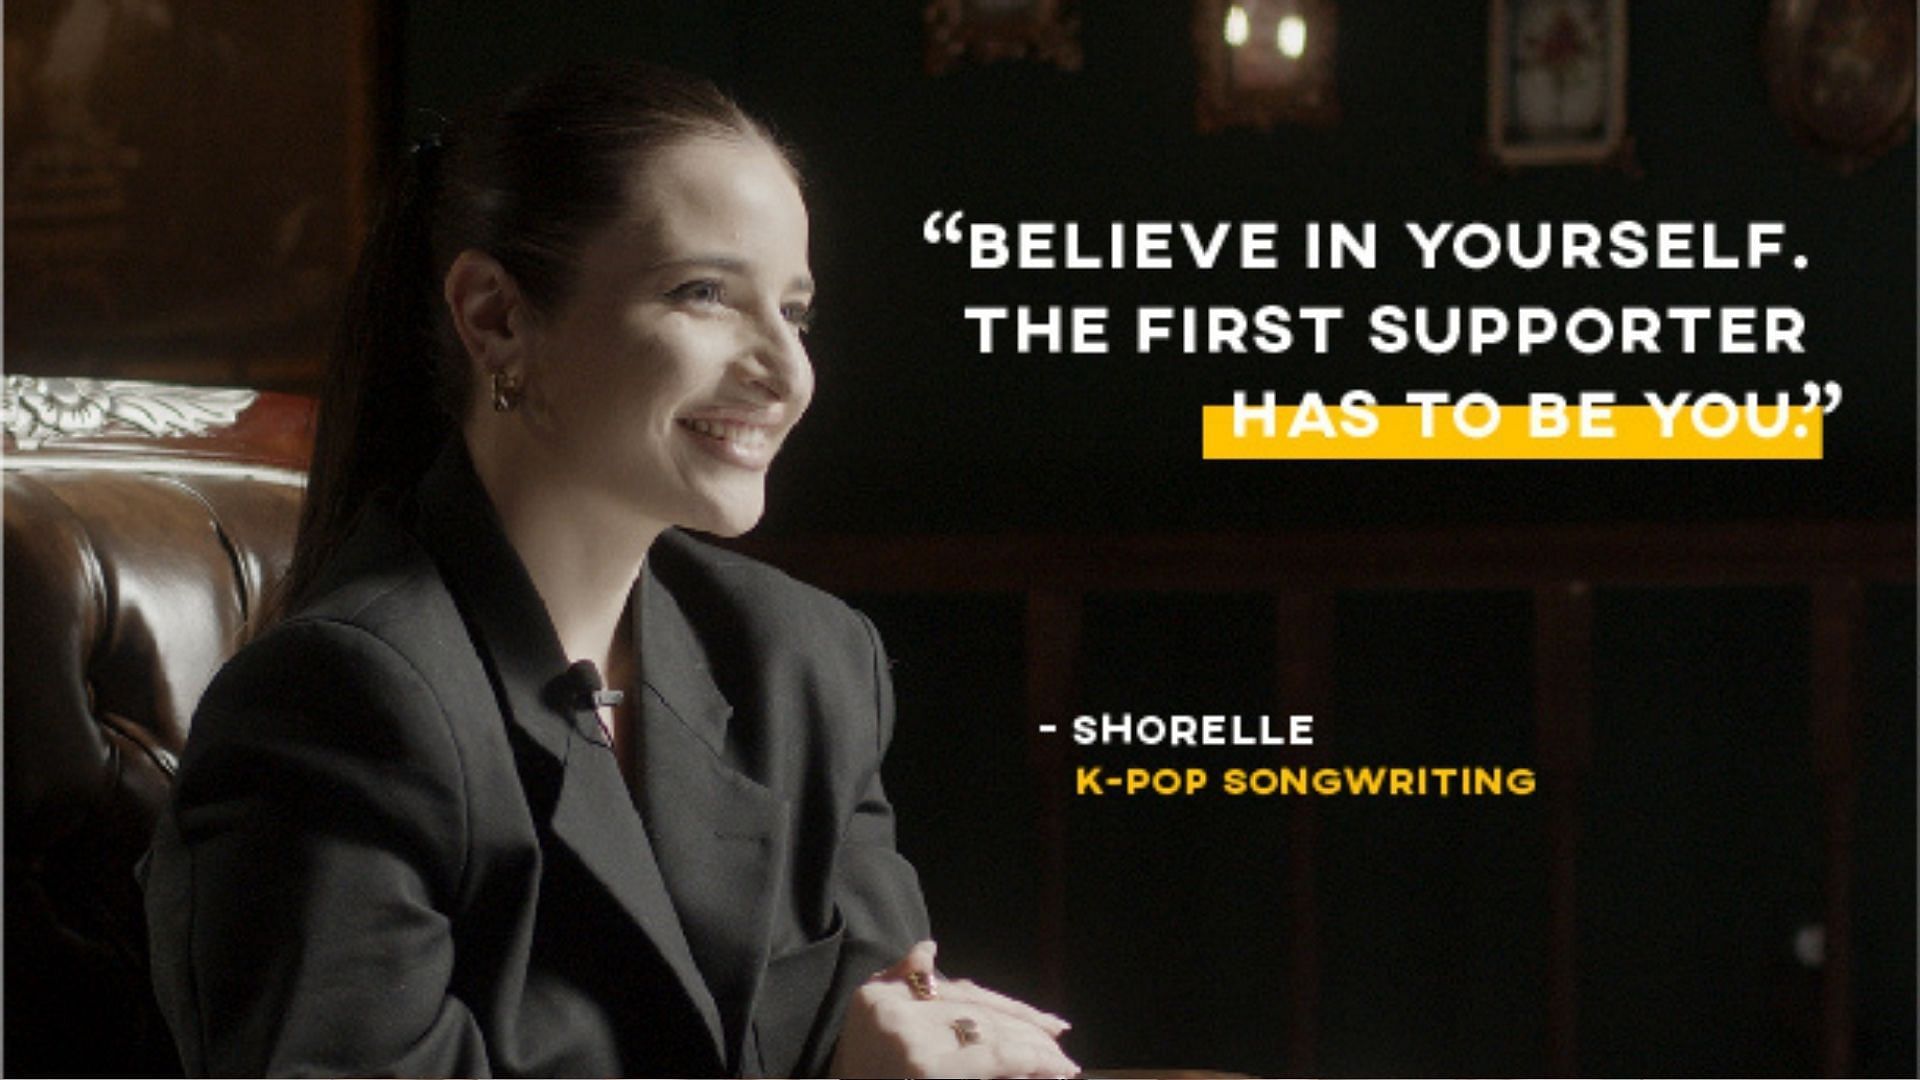 K-pop songwriter Shorelle is one of the speakers on The Director app (Image via FrontRow Co.)